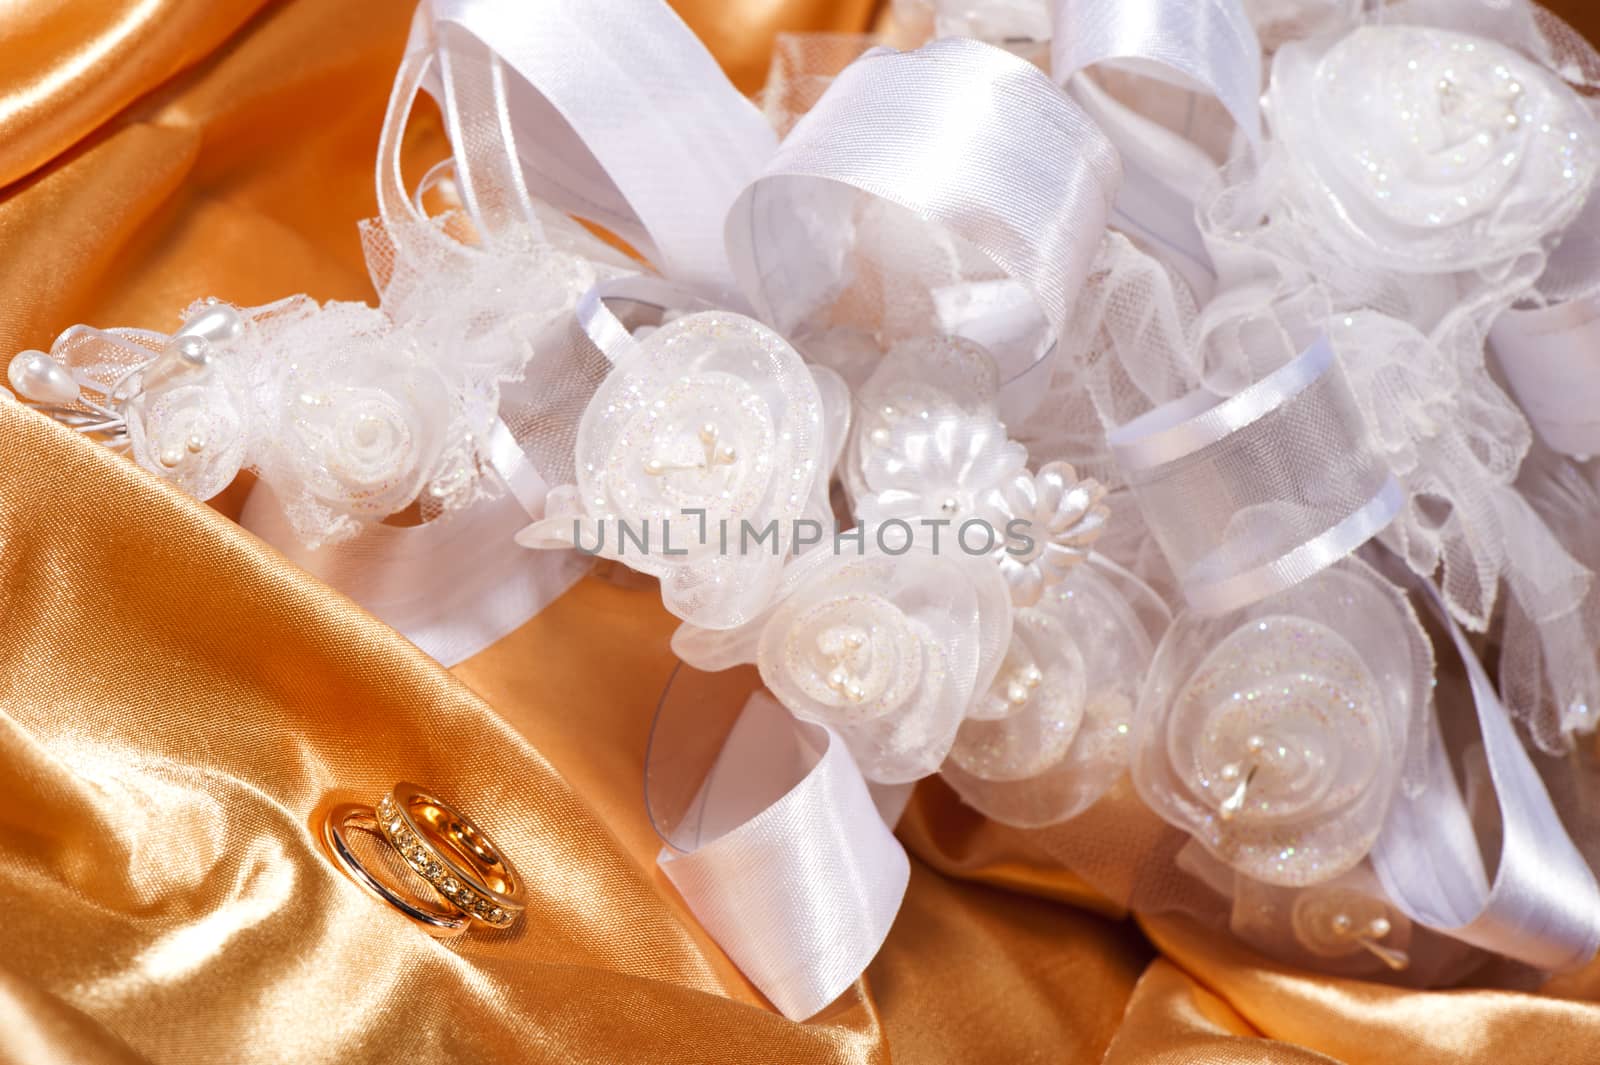  wedding rings on  a colorful fabric background